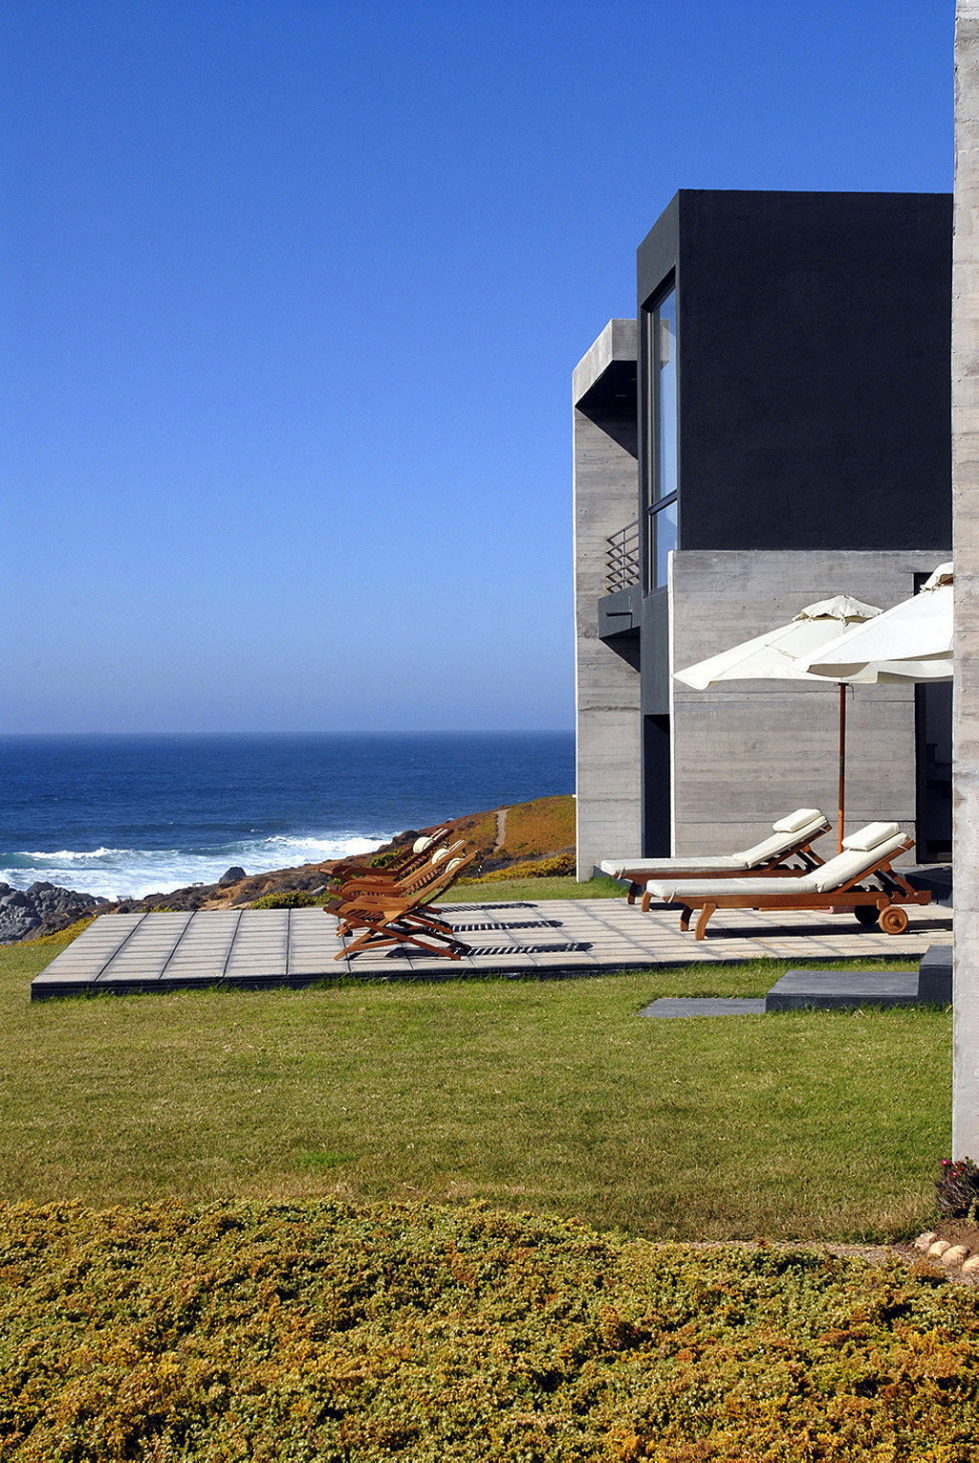 Rabanua Summer House From DX Arquitectos On The Coast of Chile 2